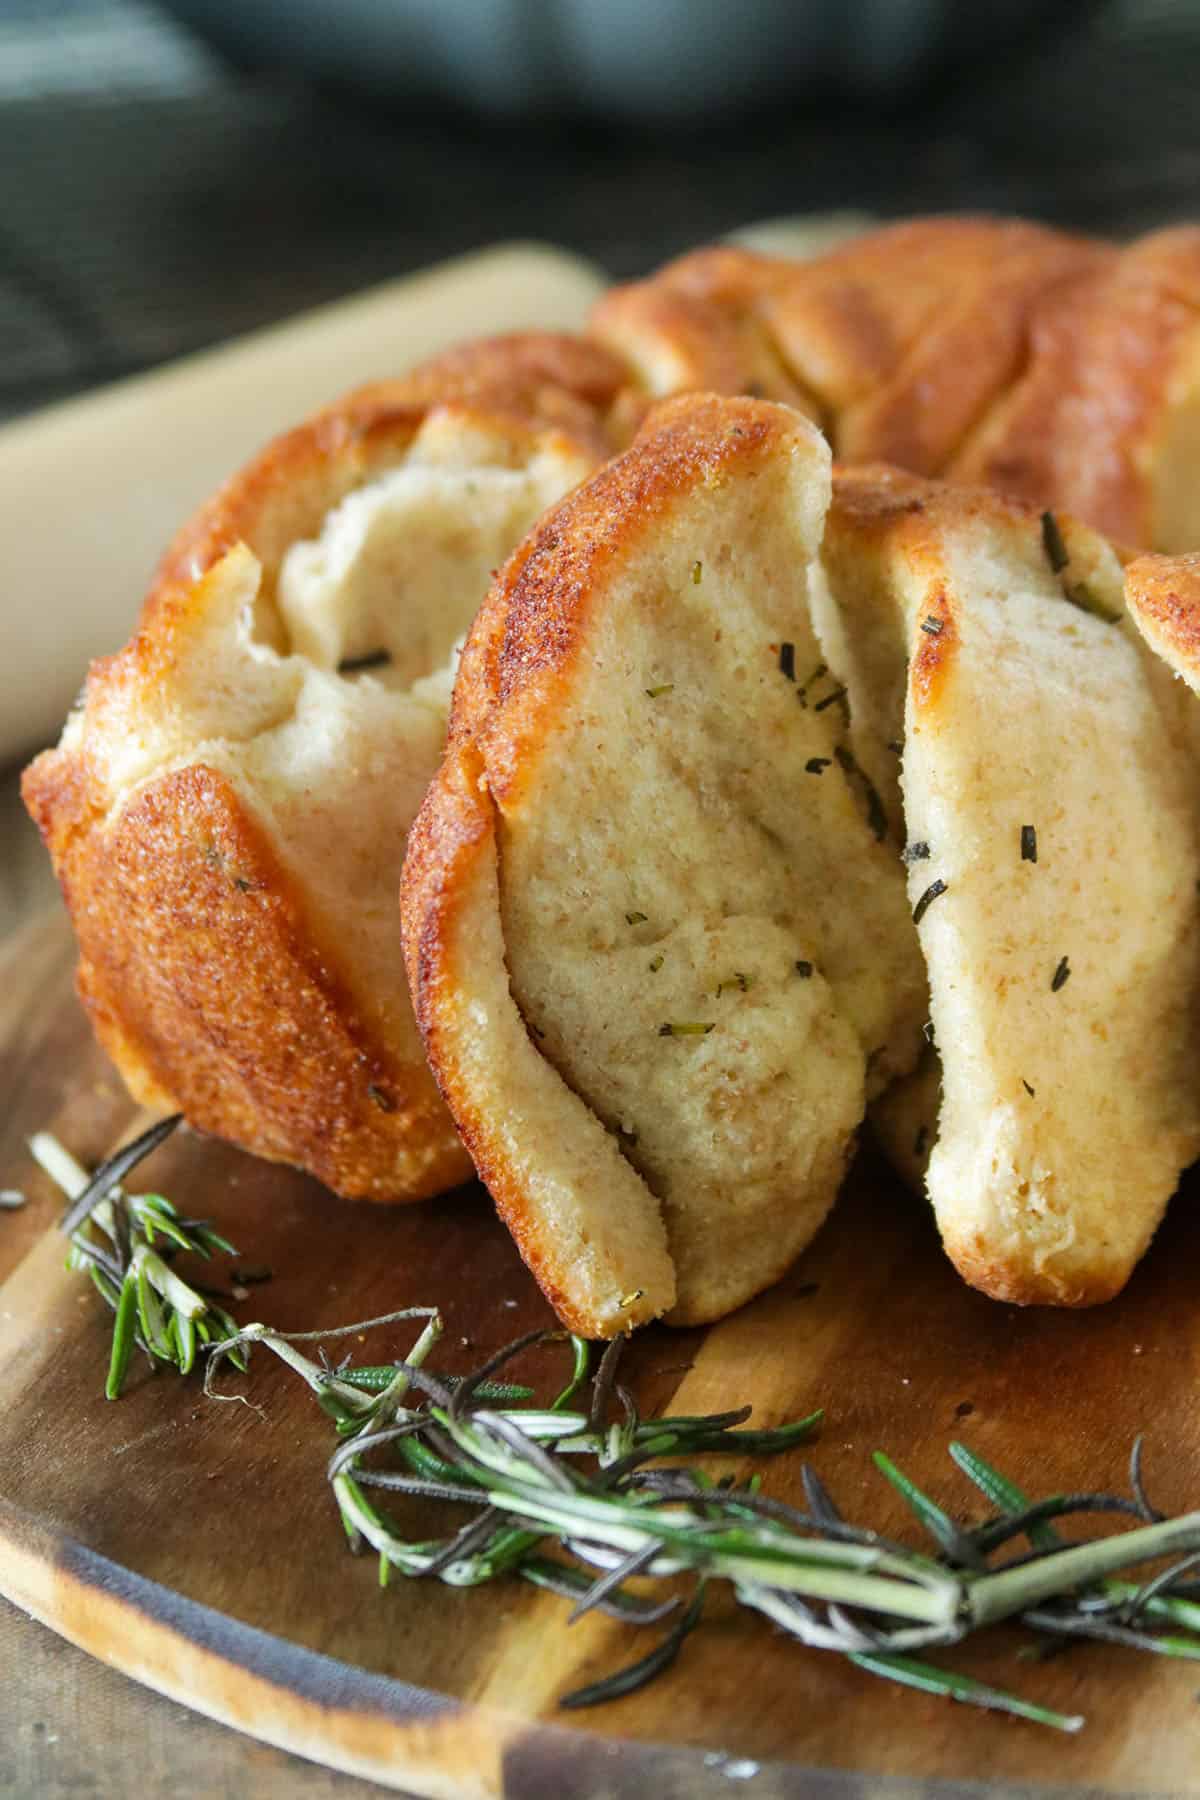 Close up of a slice of the Rosemary Garlic Pull Apart Bread.